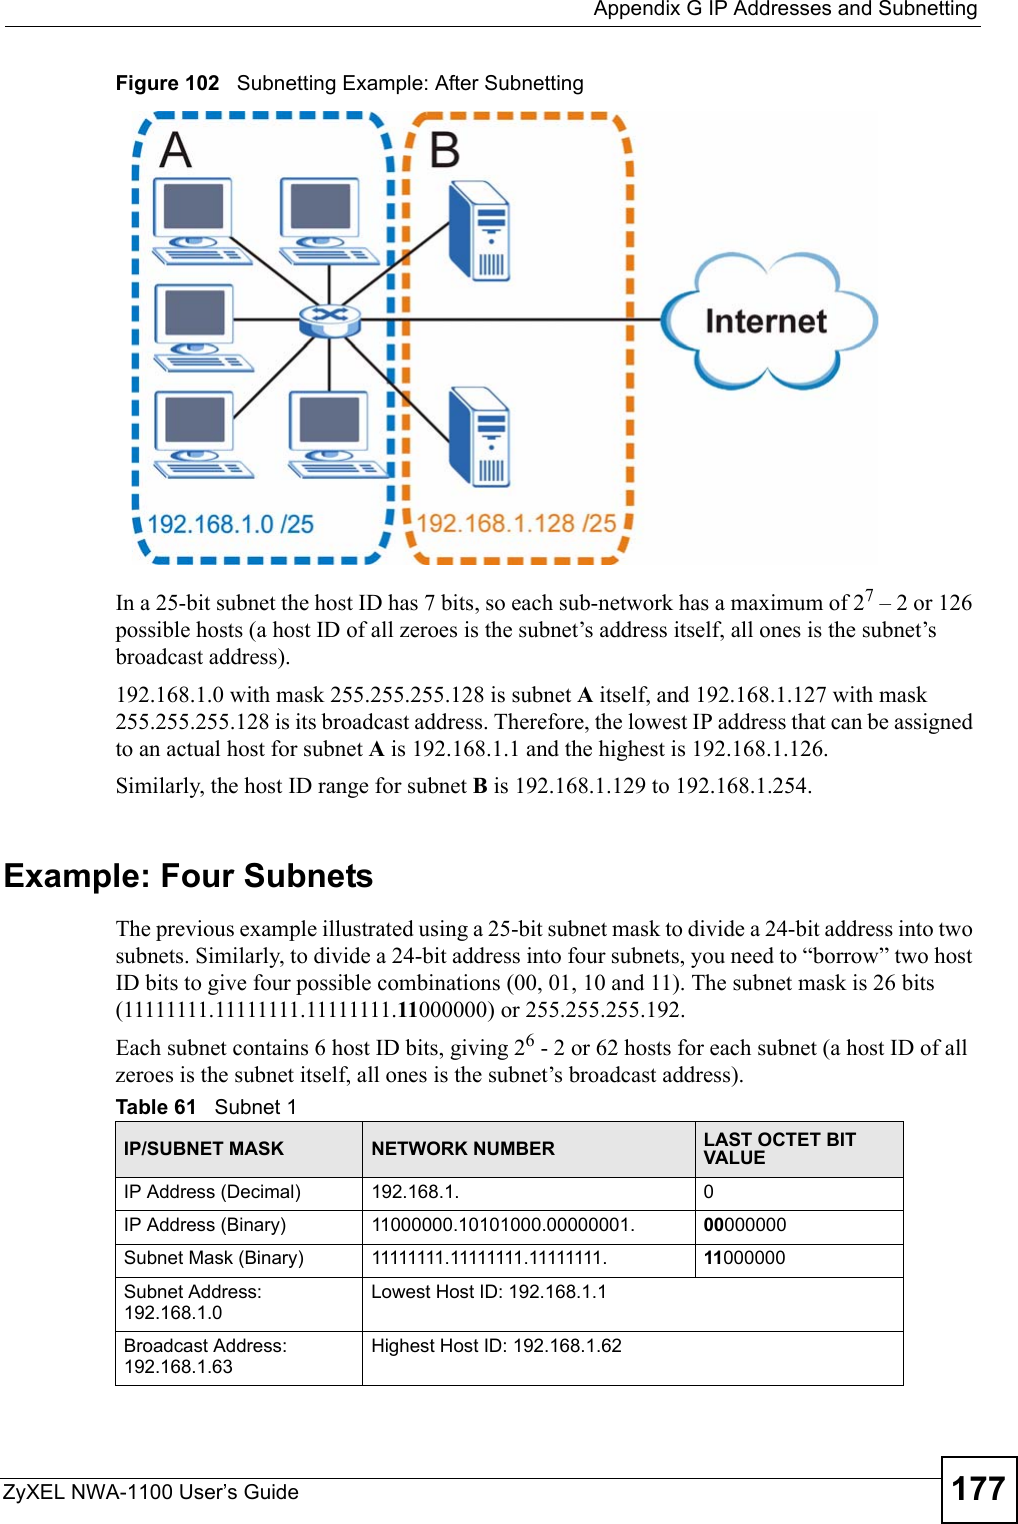  Appendix G IP Addresses and SubnettingZyXEL NWA-1100 User’s Guide 177Figure 102   Subnetting Example: After SubnettingIn a 25-bit subnet the host ID has 7 bits, so each sub-network has a maximum of 27 – 2 or 126 possible hosts (a host ID of all zeroes is the subnet’s address itself, all ones is the subnet’s broadcast address).192.168.1.0 with mask 255.255.255.128 is subnet A itself, and 192.168.1.127 with mask 255.255.255.128 is its broadcast address. Therefore, the lowest IP address that can be assigned to an actual host for subnet A is 192.168.1.1 and the highest is 192.168.1.126. Similarly, the host ID range for subnet B is 192.168.1.129 to 192.168.1.254.Example: Four Subnets The previous example illustrated using a 25-bit subnet mask to divide a 24-bit address into two subnets. Similarly, to divide a 24-bit address into four subnets, you need to “borrow” two host ID bits to give four possible combinations (00, 01, 10 and 11). The subnet mask is 26 bits (11111111.11111111.11111111.11000000) or 255.255.255.192. Each subnet contains 6 host ID bits, giving 26 - 2 or 62 hosts for each subnet (a host ID of all zeroes is the subnet itself, all ones is the subnet’s broadcast address). Table 61   Subnet 1IP/SUBNET MASK NETWORK NUMBER LAST OCTET BIT VALUEIP Address (Decimal) 192.168.1. 0IP Address (Binary) 11000000.10101000.00000001. 00000000Subnet Mask (Binary) 11111111.11111111.11111111. 11000000Subnet Address: 192.168.1.0Lowest Host ID: 192.168.1.1Broadcast Address: 192.168.1.63Highest Host ID: 192.168.1.62